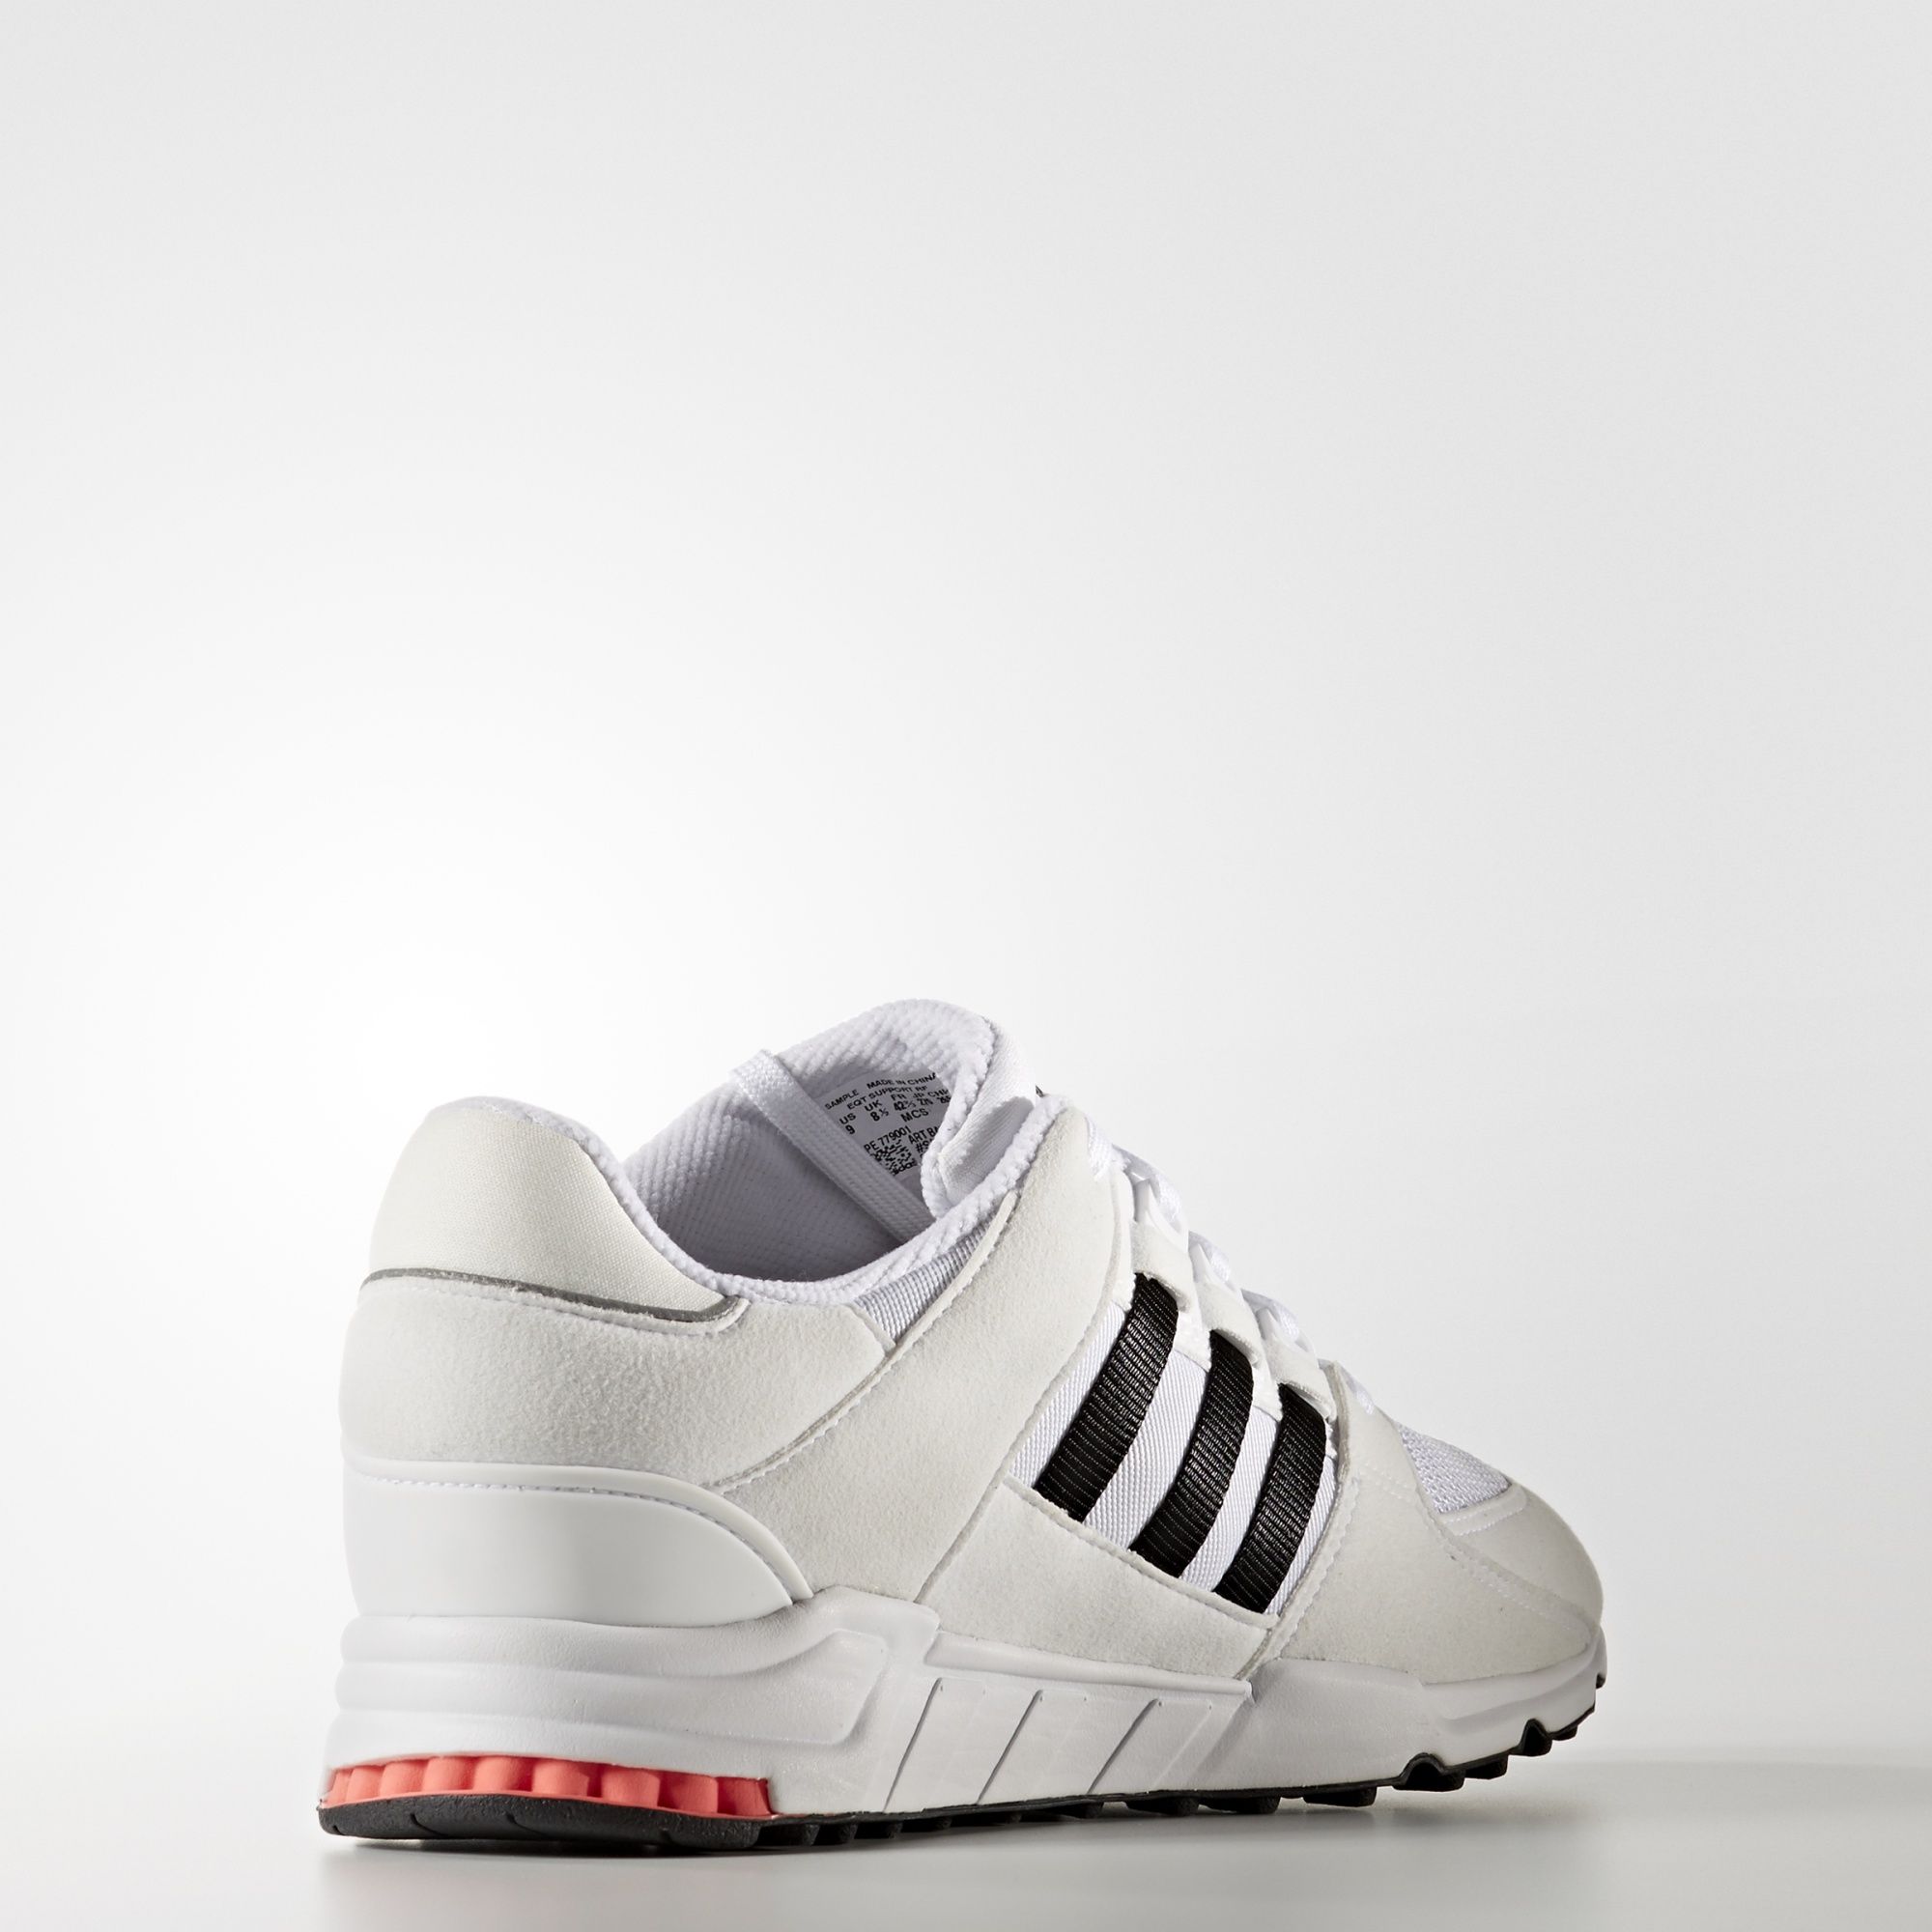 Adidas EQT Support RF
Vintage White / Core Black / Footwear White